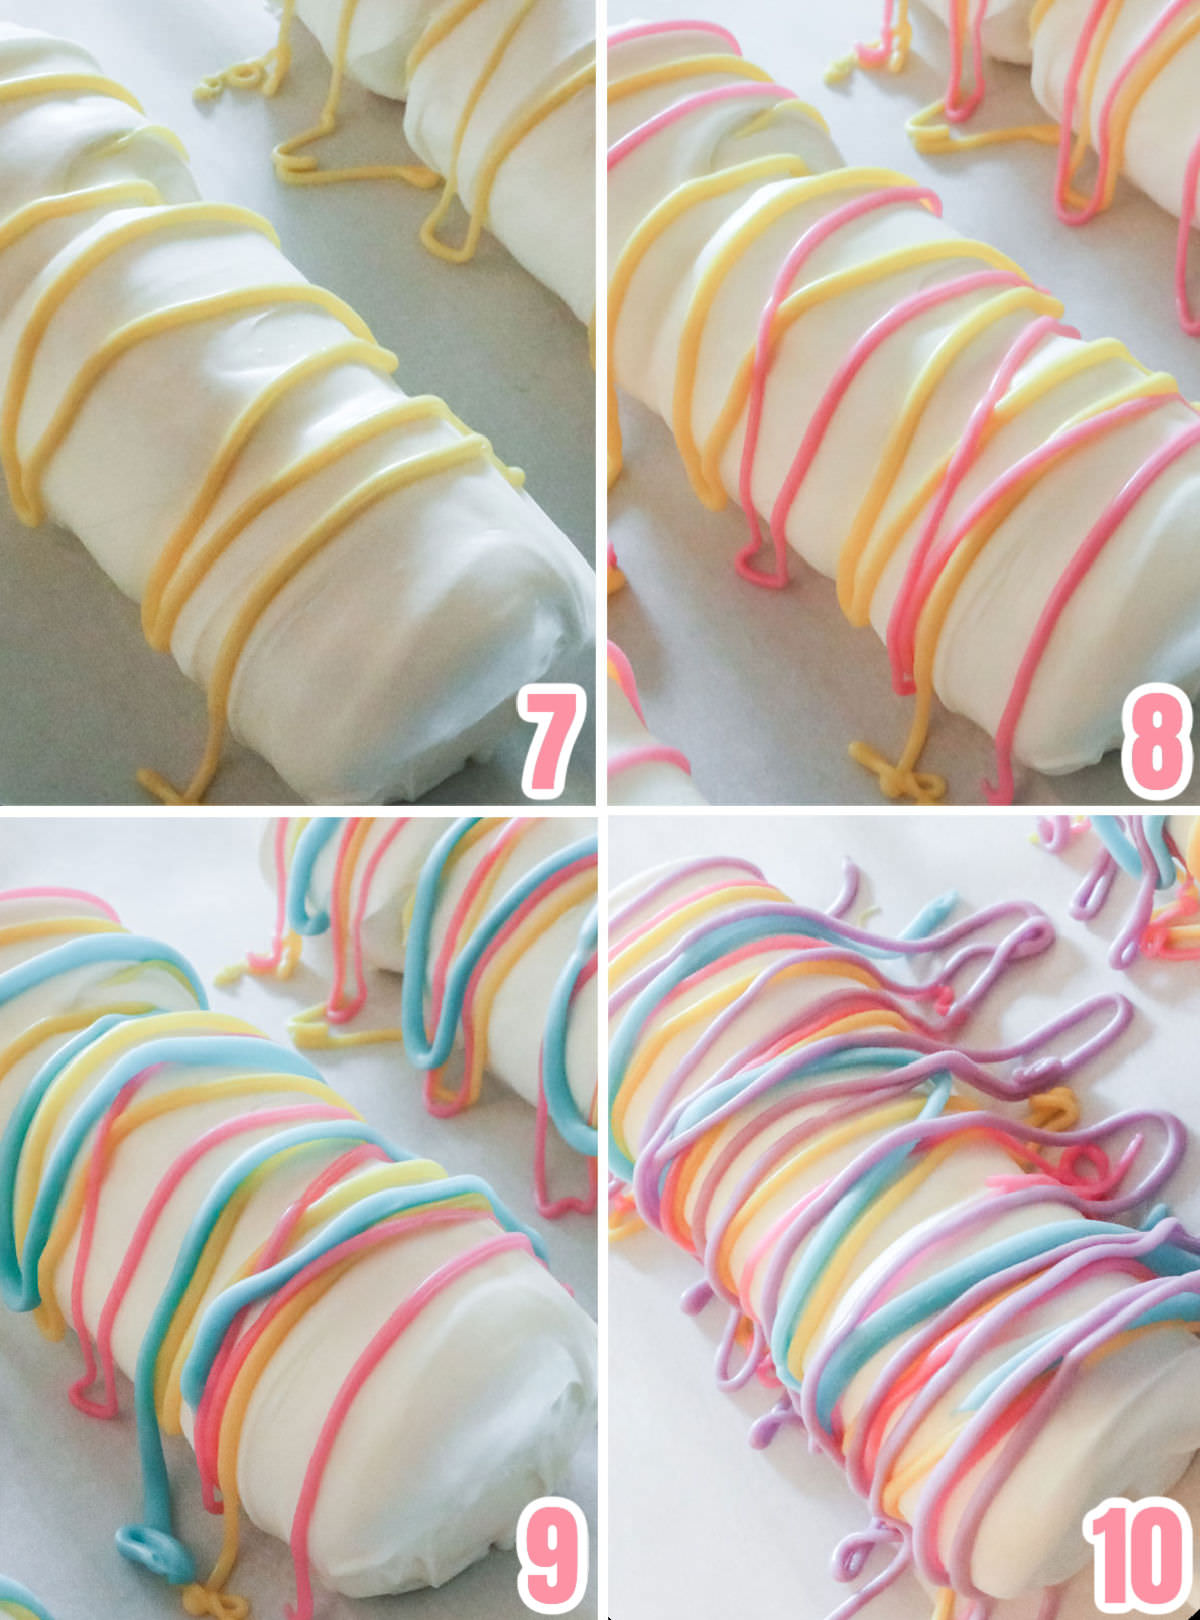 Collage image showing the steps we used to decorated the Marshmallow Pops with pastel colored candy melt drizzles.